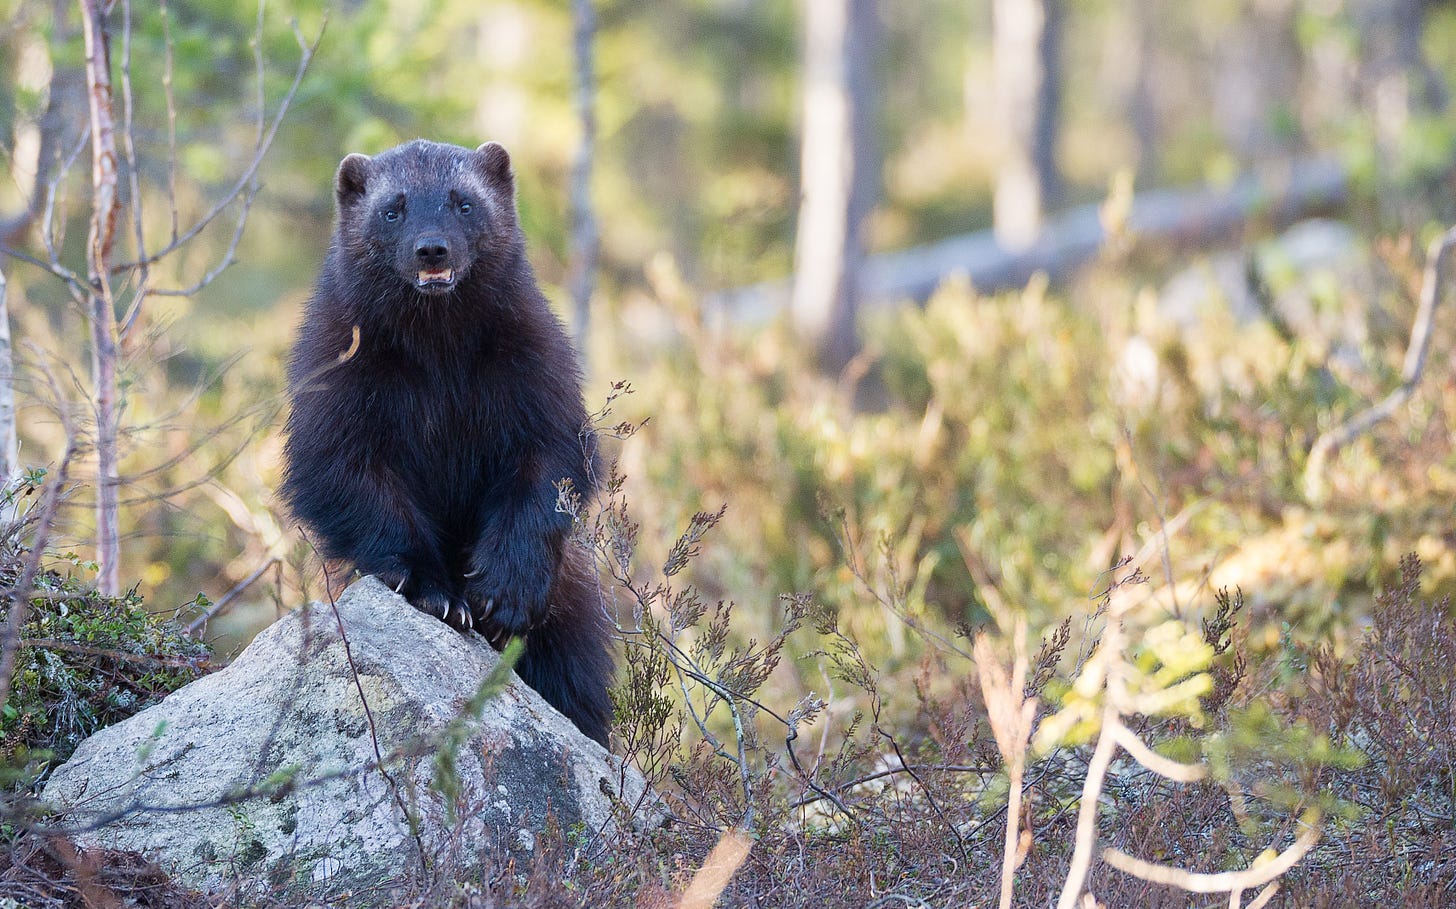 A black wolverine with white eyebrows standing with its paws on a rock with its mouth open, looking rather like a derpy vampire